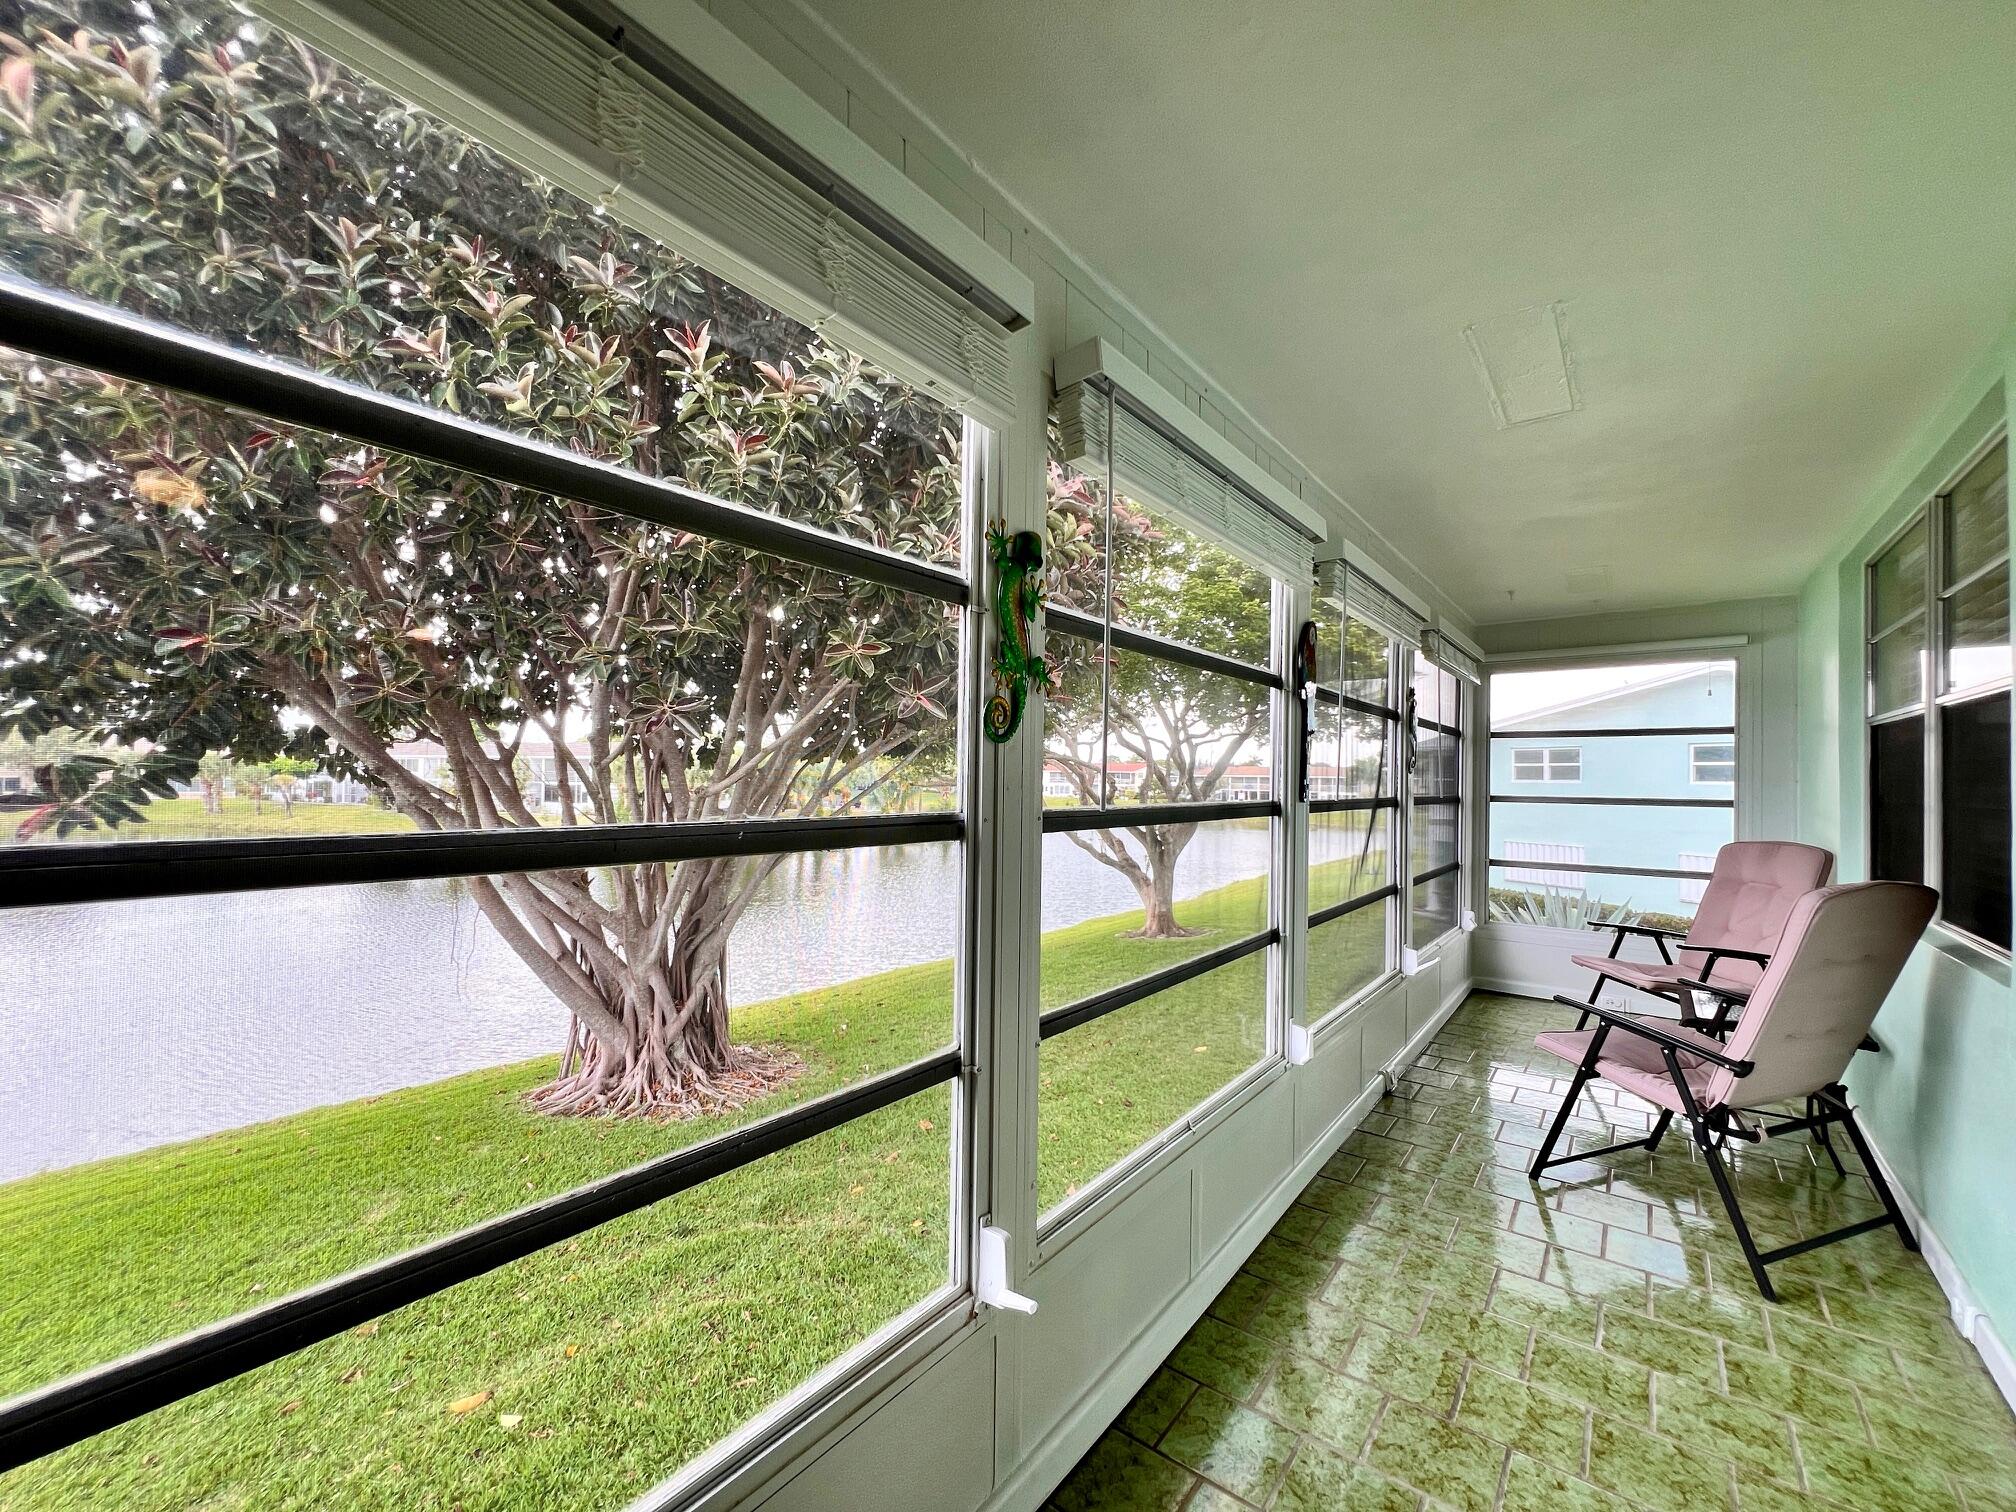 133 Somerset G, West Palm Beach, Palm Beach County, Florida - 2 Bedrooms  
1.5 Bathrooms - 